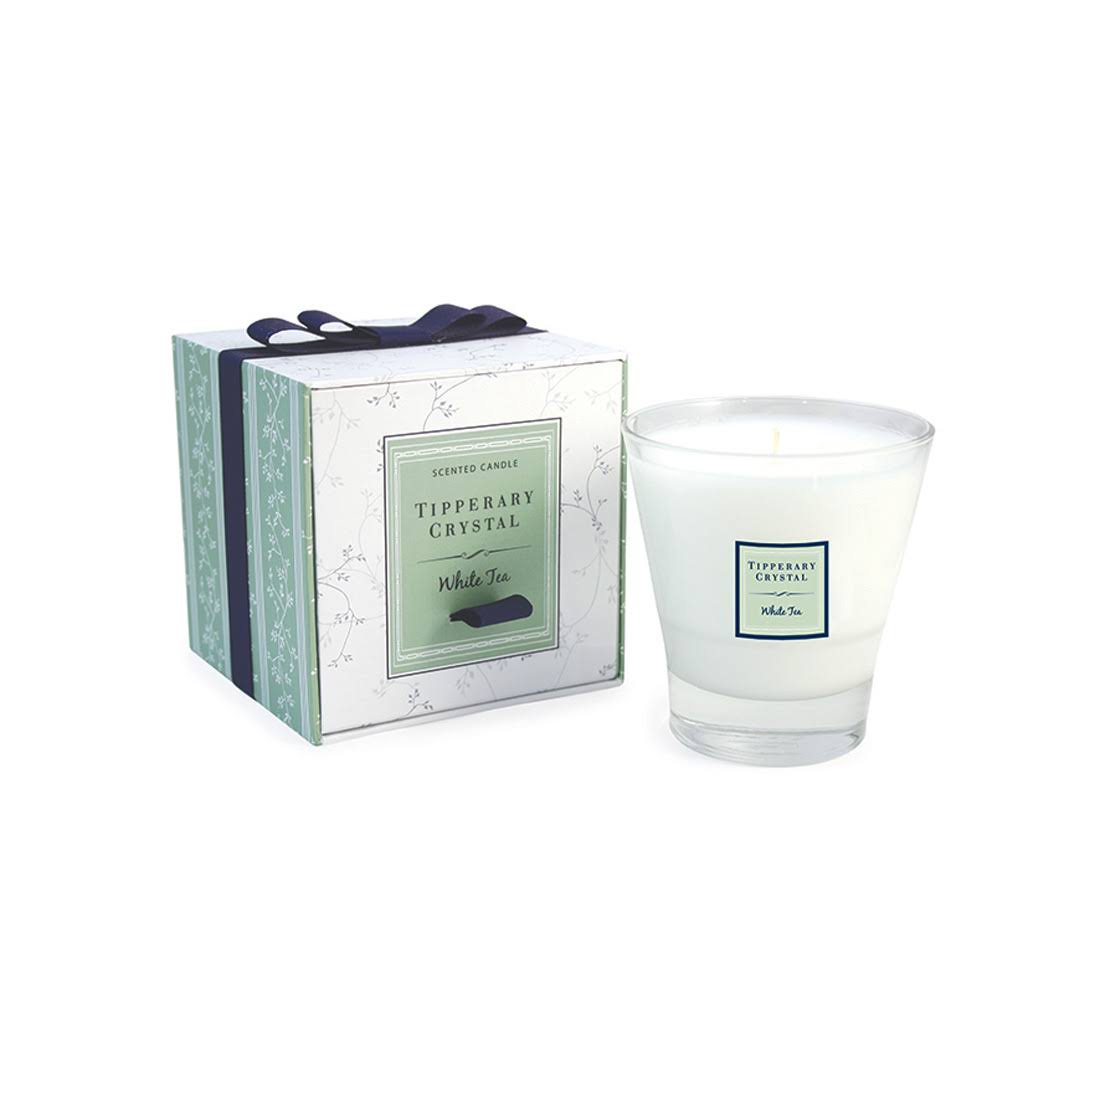 Tipperary Crystal Designed Tumbler White Tea Scented Candle